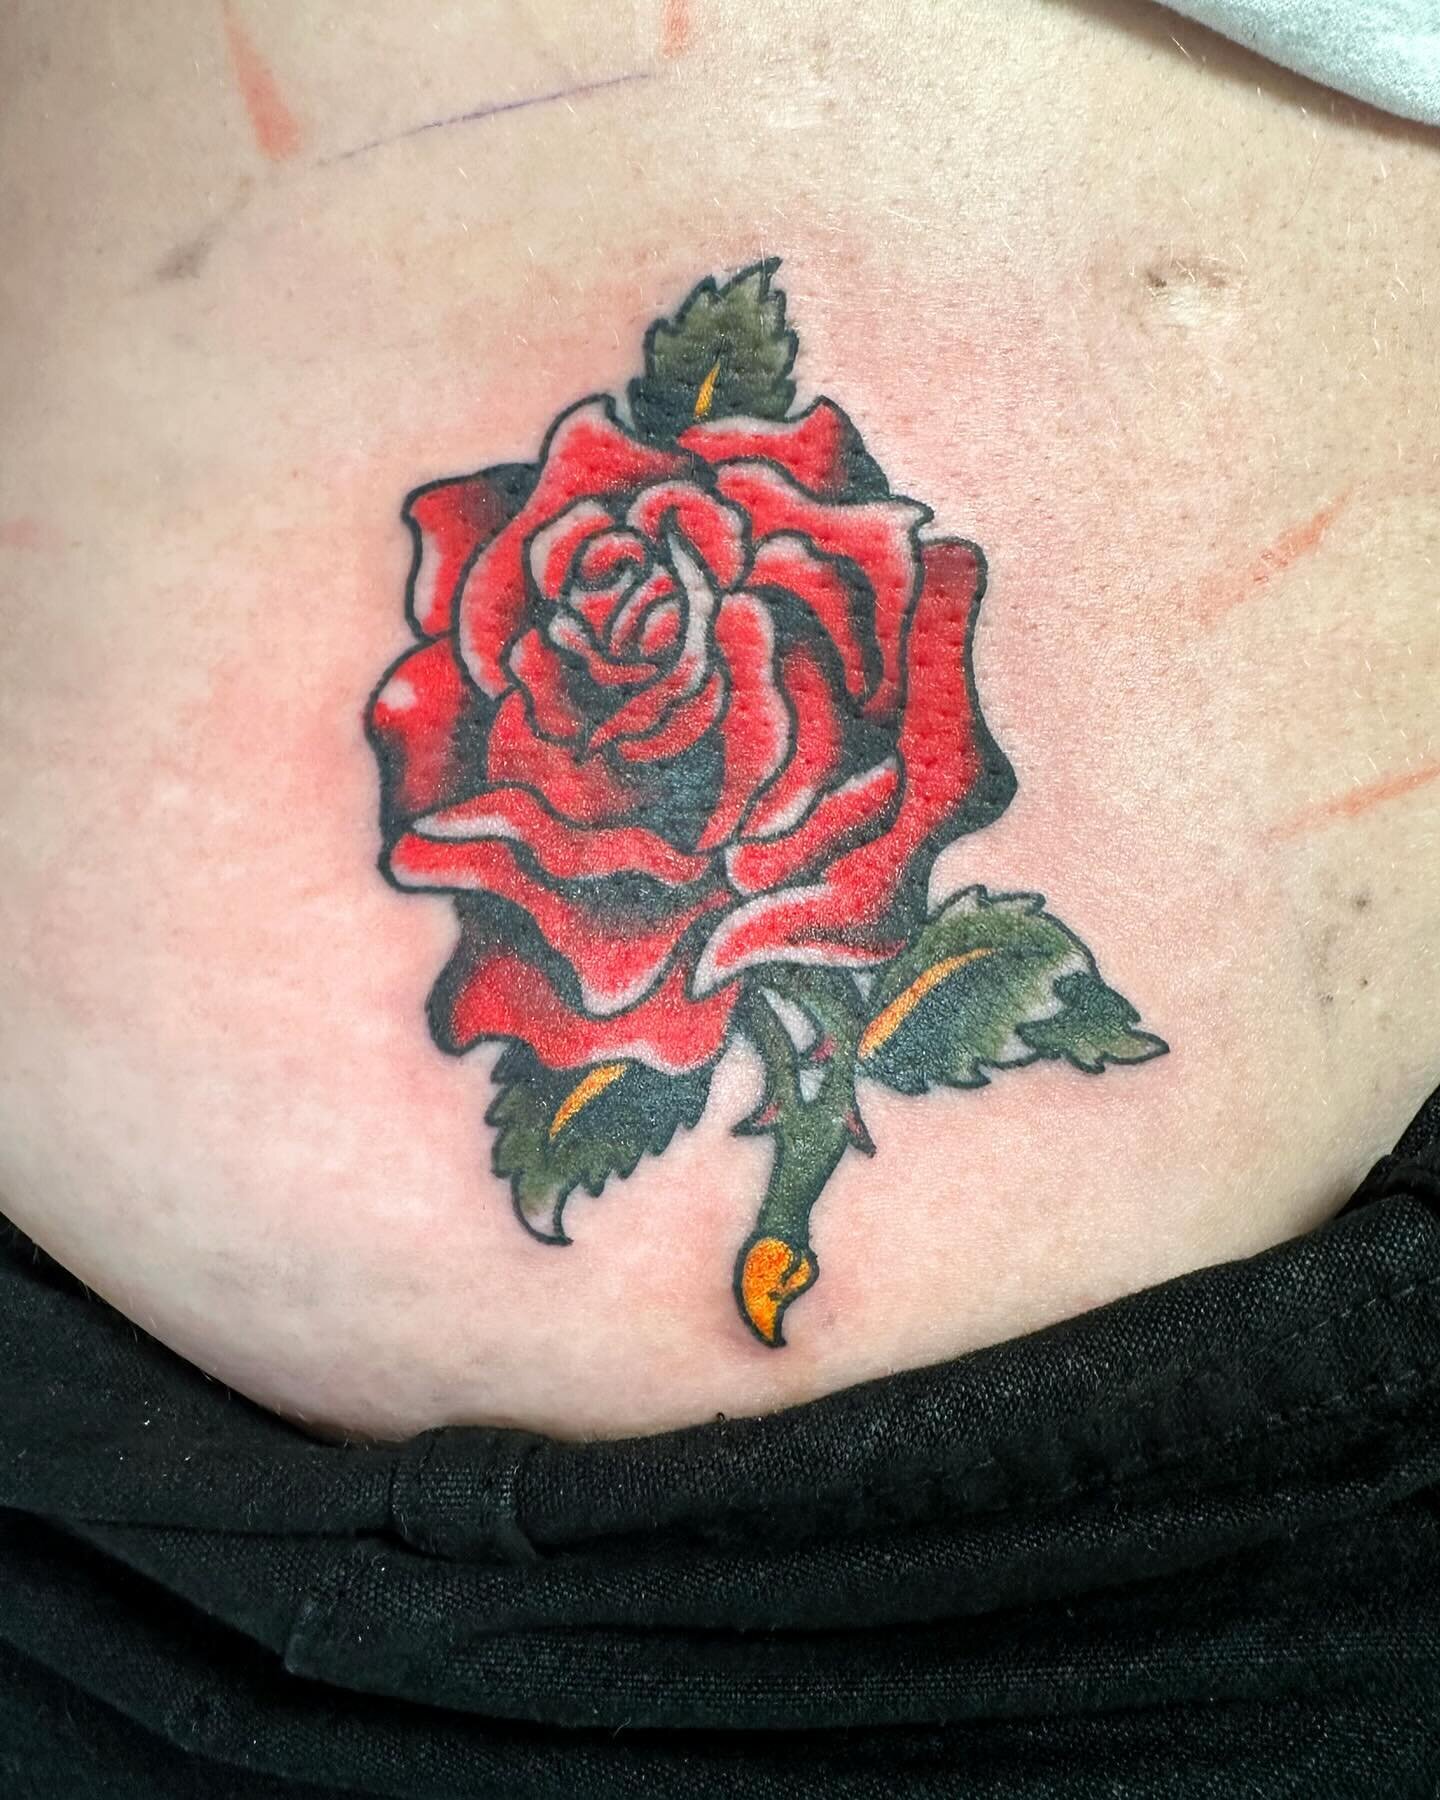 Rose cover up 🌹 
📍Brooklyn, NY - @greenpointtattooco 
To book a tattoo, call the shop or fill out my booking form 🔗 link in bio
.
.
.
.
.
.
.
.
.
.
.
.
.
.
.
#tattooshop #coverup #rosetattoo #rose #coveruptattoo #colortattoos #tattooshop #nyc #bro